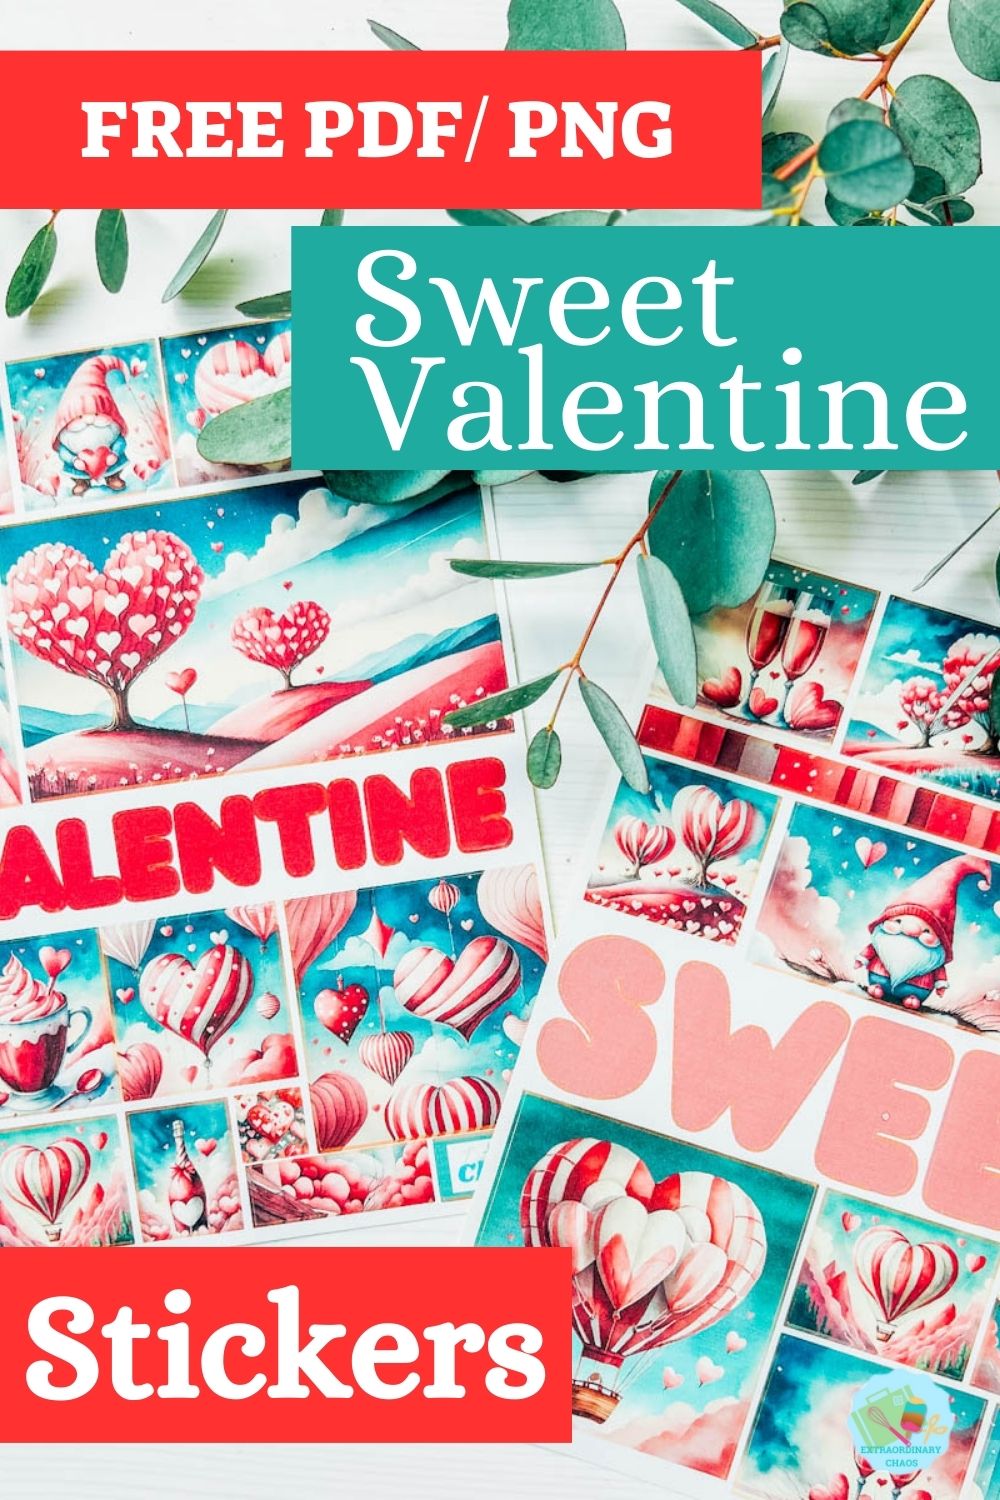 Free PDF PNG sweet valentine printable Stickers for Cricut and Silhouette-2